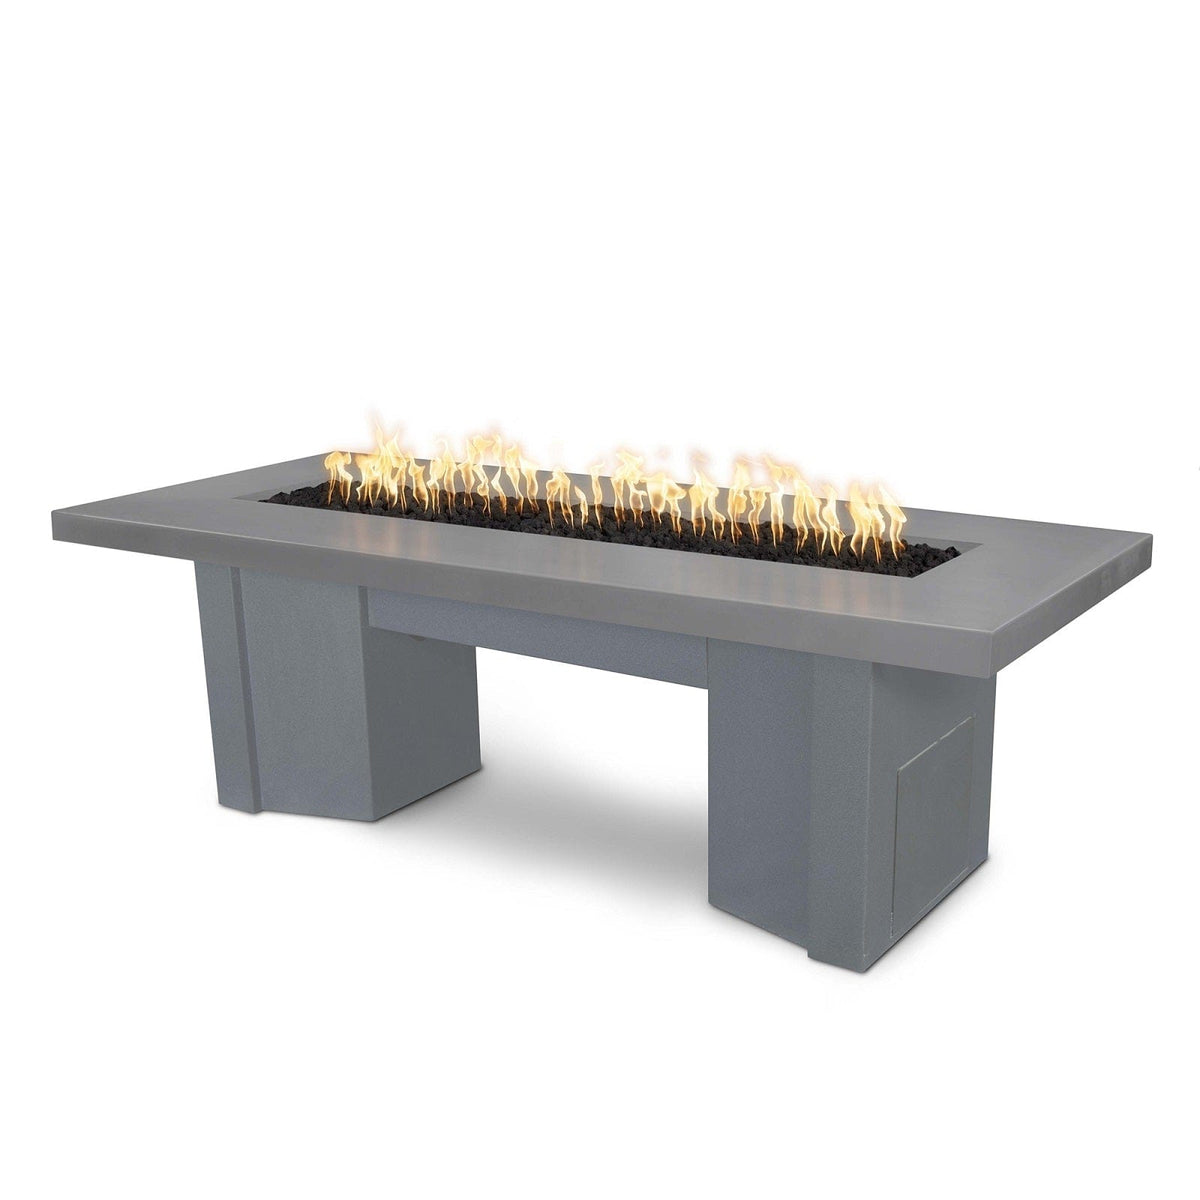 The Outdoor Plus Fire Features Natural Gray (-NGY) / Gray Powder Coated Steel (-GRY) The Outdoor Plus 60&quot; Alameda Fire Table Smooth Concrete in Liquid Propane - Match Lit / OPT-ALMGFRC60-LP